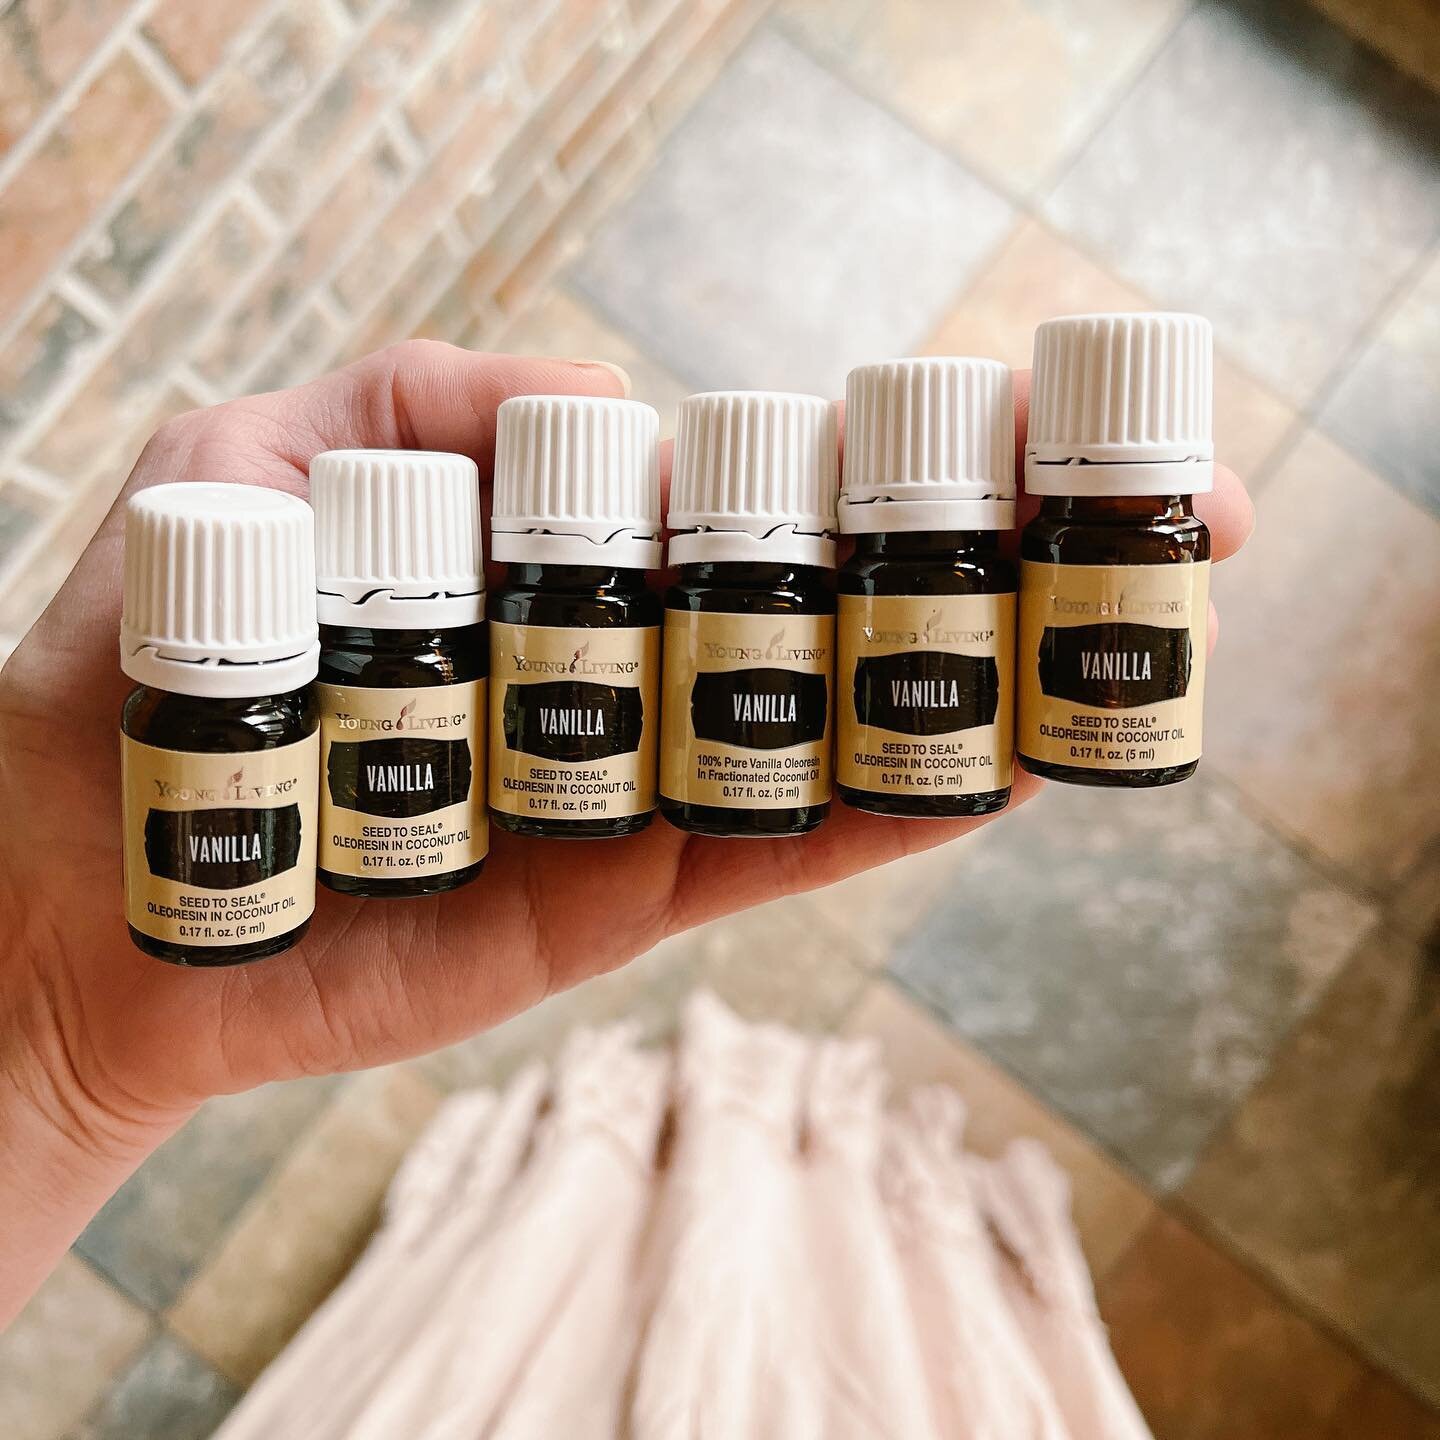 Ever wonder why the bottle says Vanilla Oleoresin in coconut oil and not Vanilla Essential oil? Swipe left to read why as well as save some vanilla diffuser blends.

If you find vanilla oil, it is either 
1. Synthetically reproduced. It is easy to ma